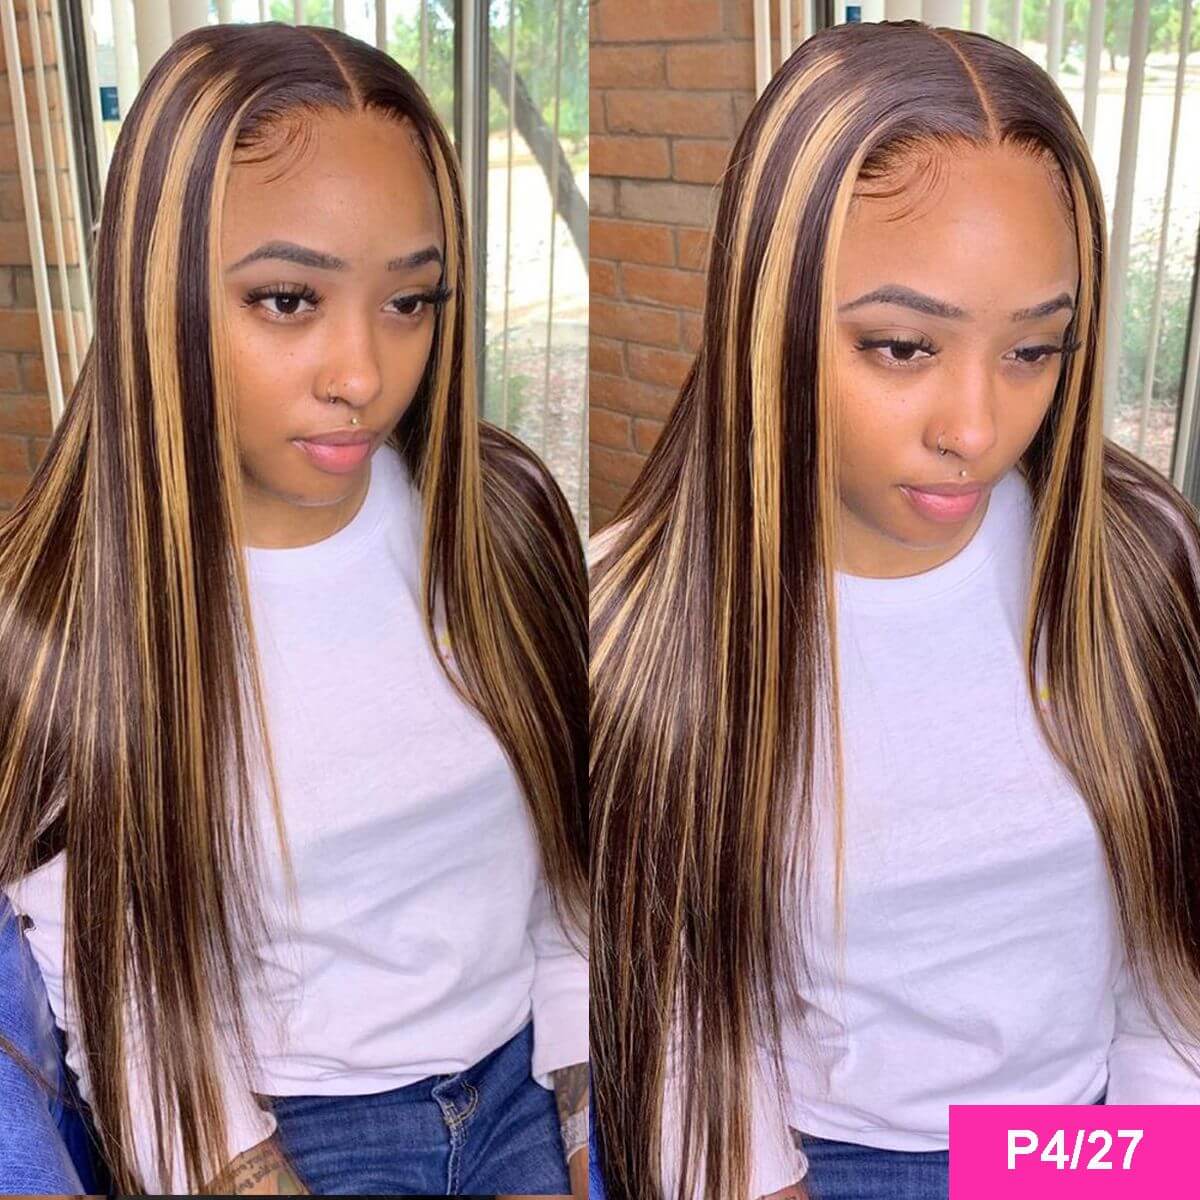 highlight straight front wigs,4/27 straight front wig,4/27 straight lace frontal wigs,4/27 lace frontal wigs,4/30 straight hair front wig,4/30 straight hair front wig,ombre color wig